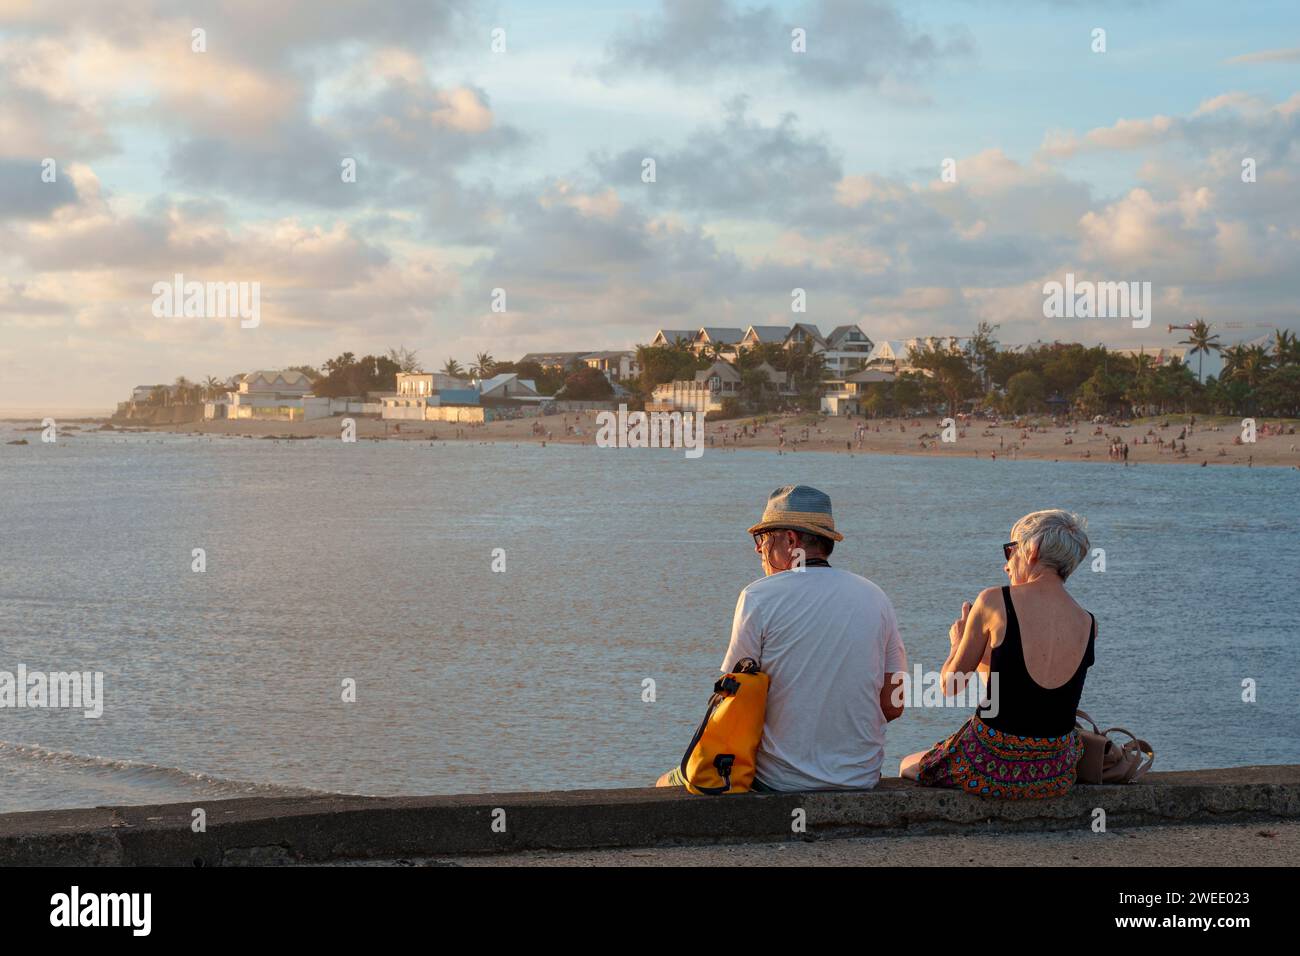 A retired tourist couple enjoying the sunset over the lagoon at Saint-Pierre, Réunion Island. They are sitting on the harbour jetty. Stock Photo